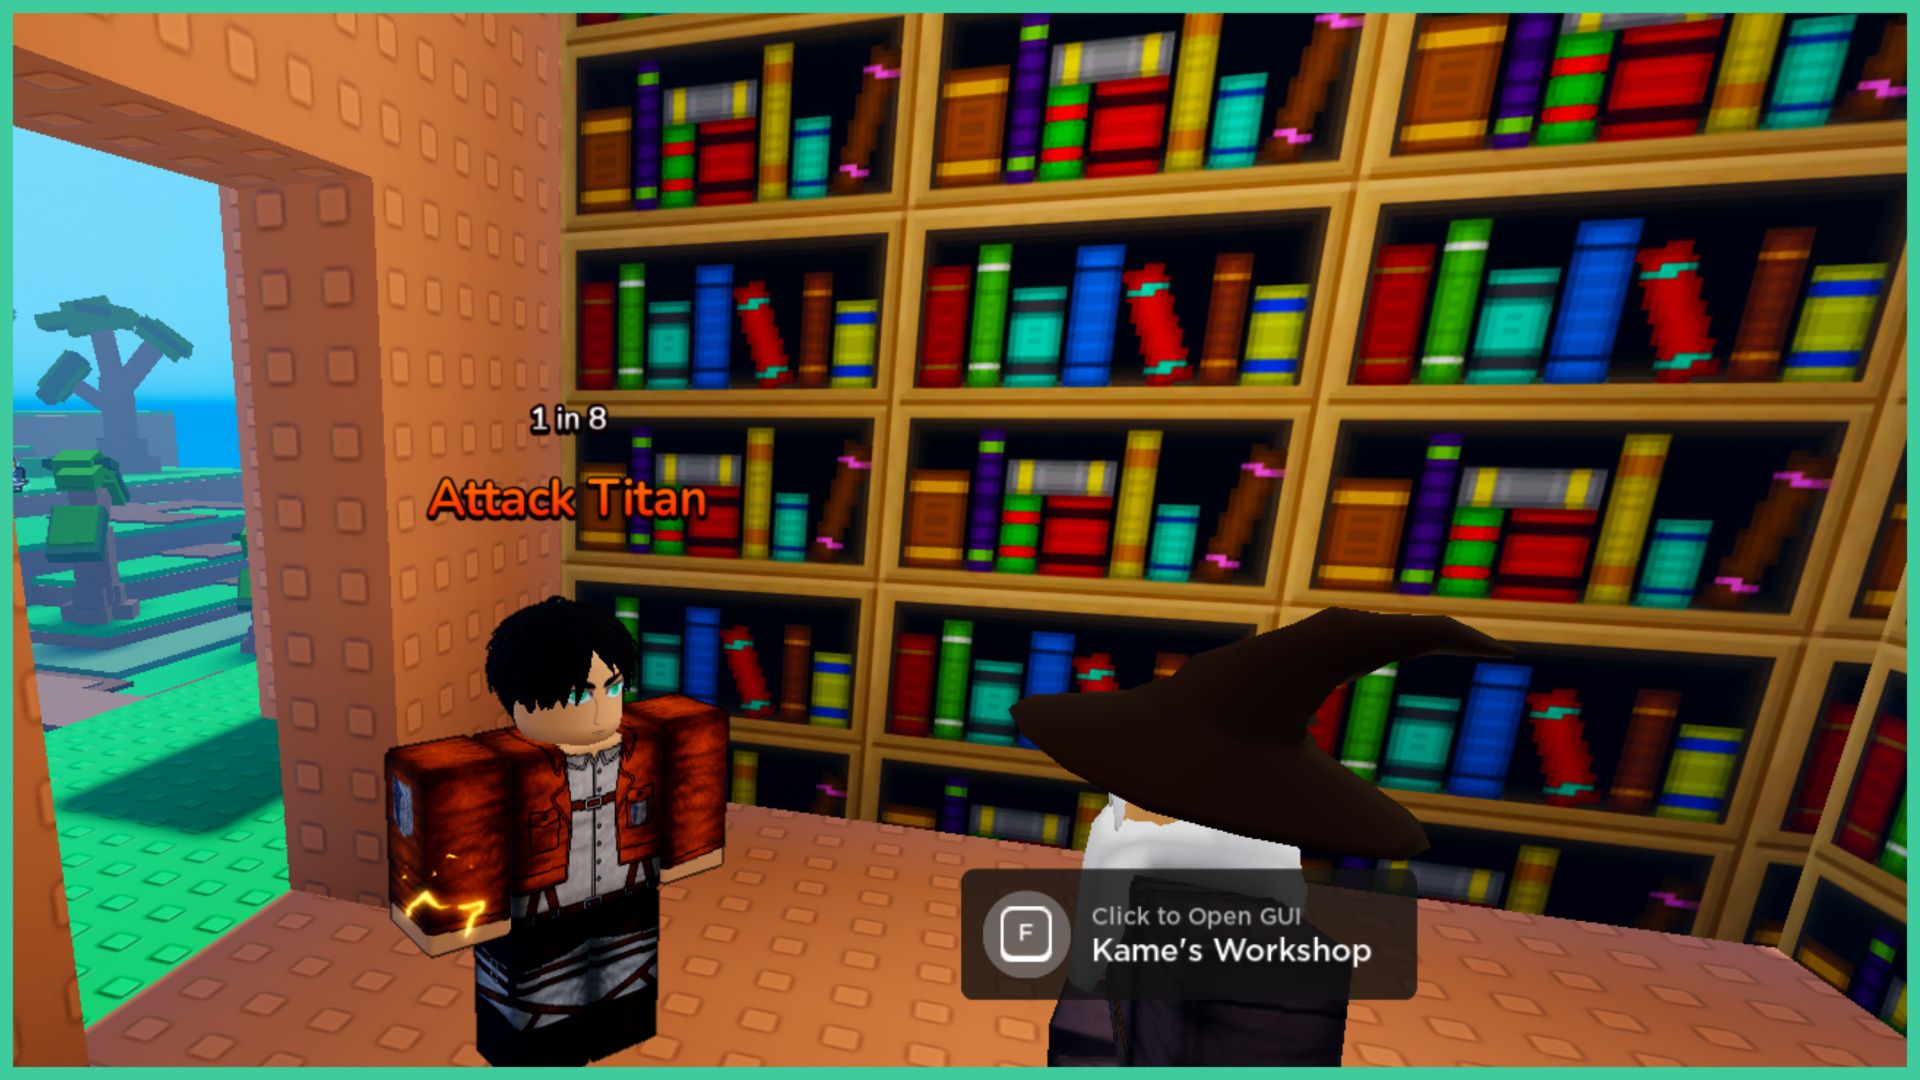 feature image for our anime rng grimoires guide, the image features a screenshot from the game of a roblox version of eren from attack on titan standing inside of a small library with bookshelves filled with a variety of books with a wizard NPC wearing a wizard hat